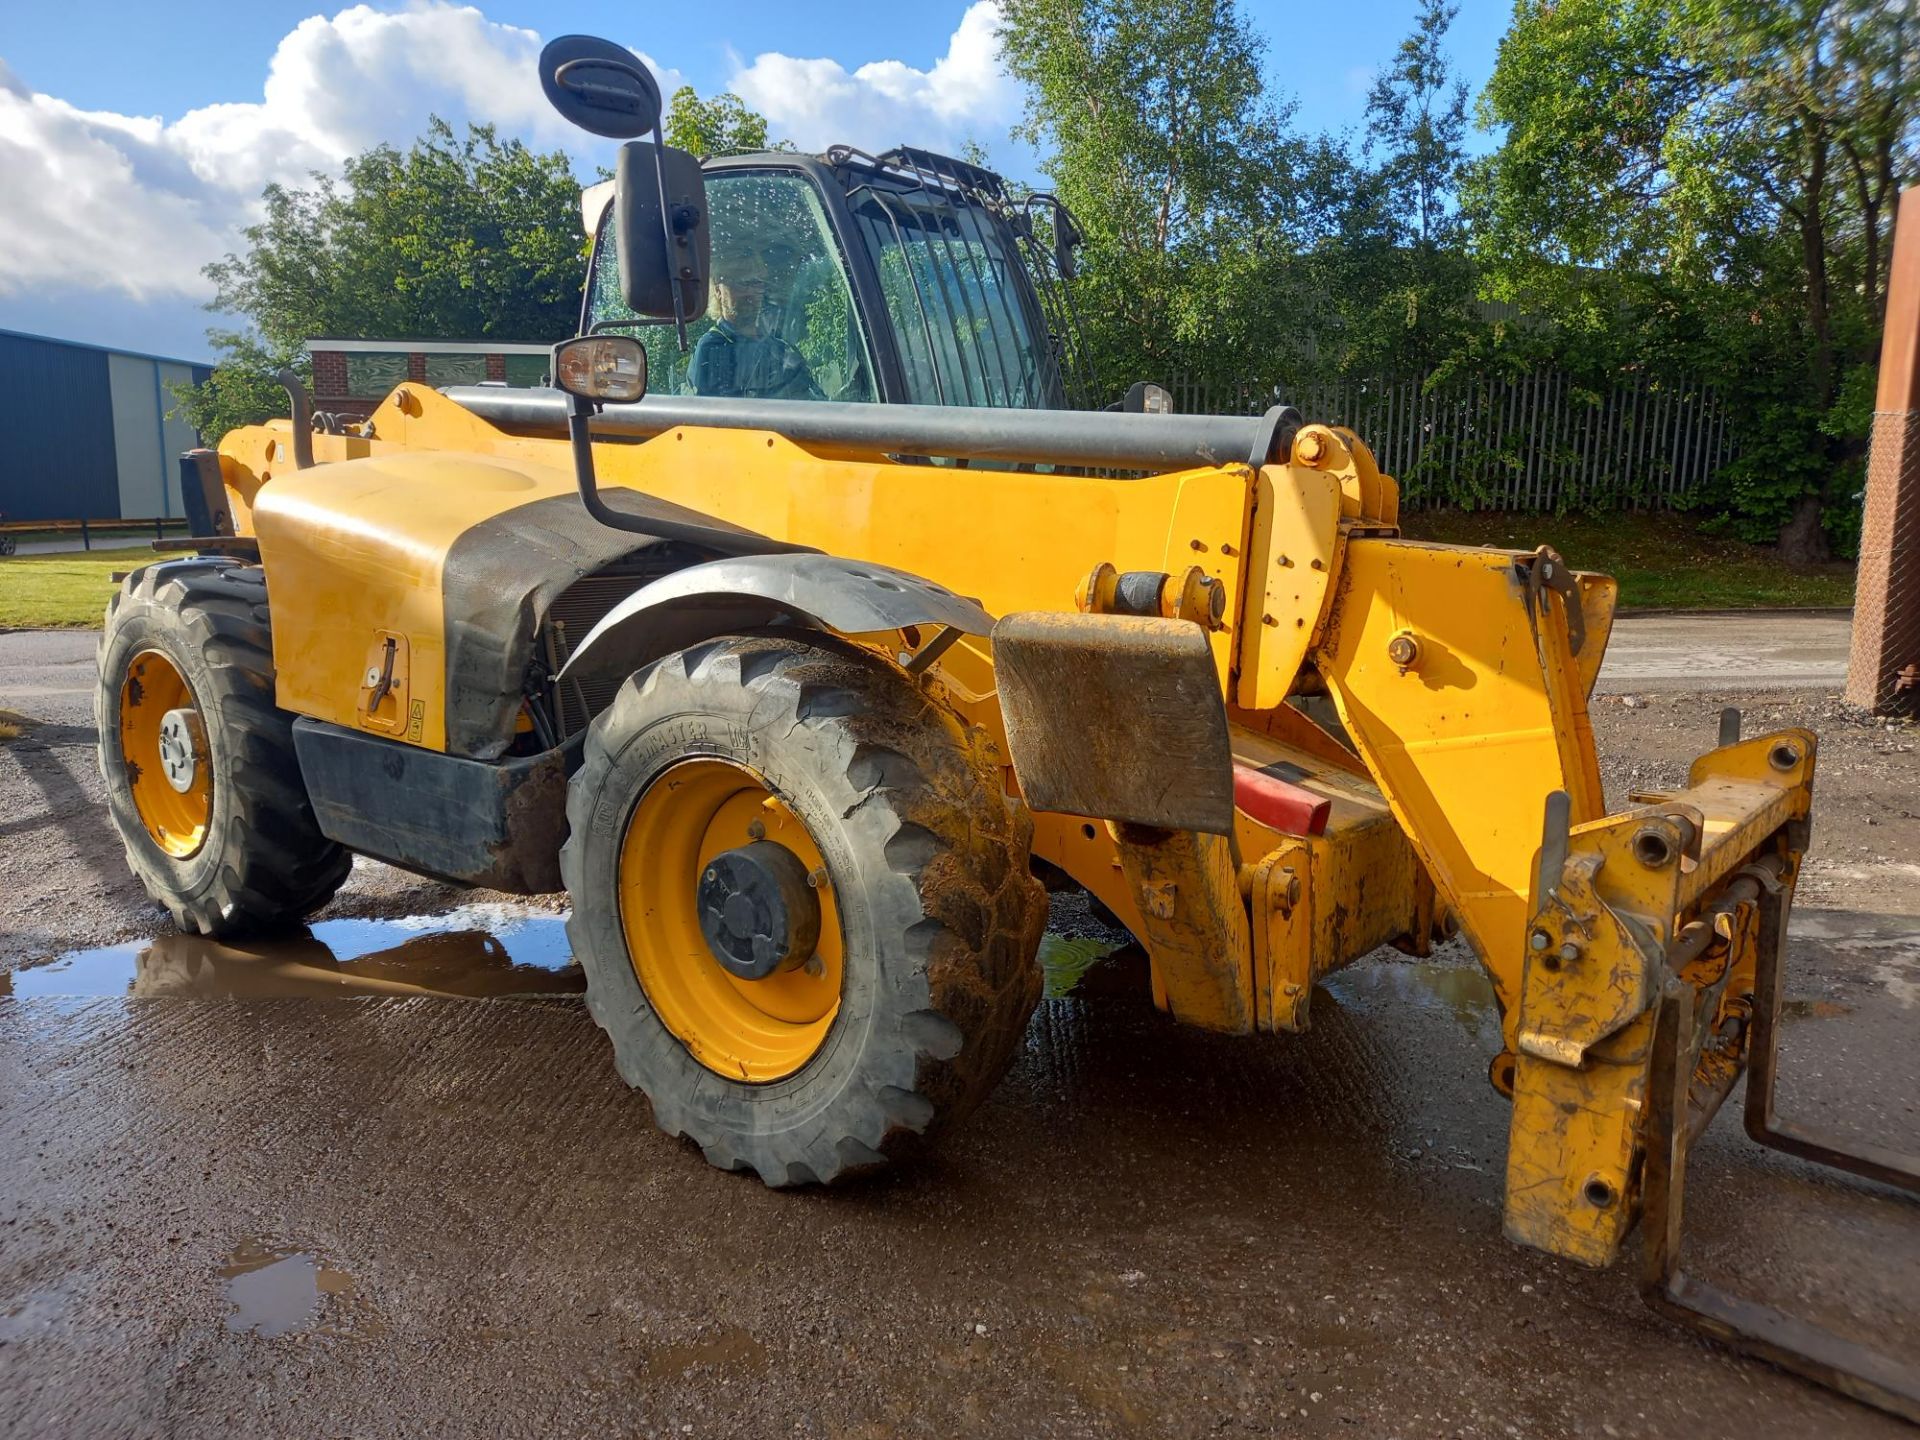 2012 JCB 535-125 Hi Viz 4x4 telehandler c/w forks and fitted with 3rd hydraulic line. Approx. 6680 r